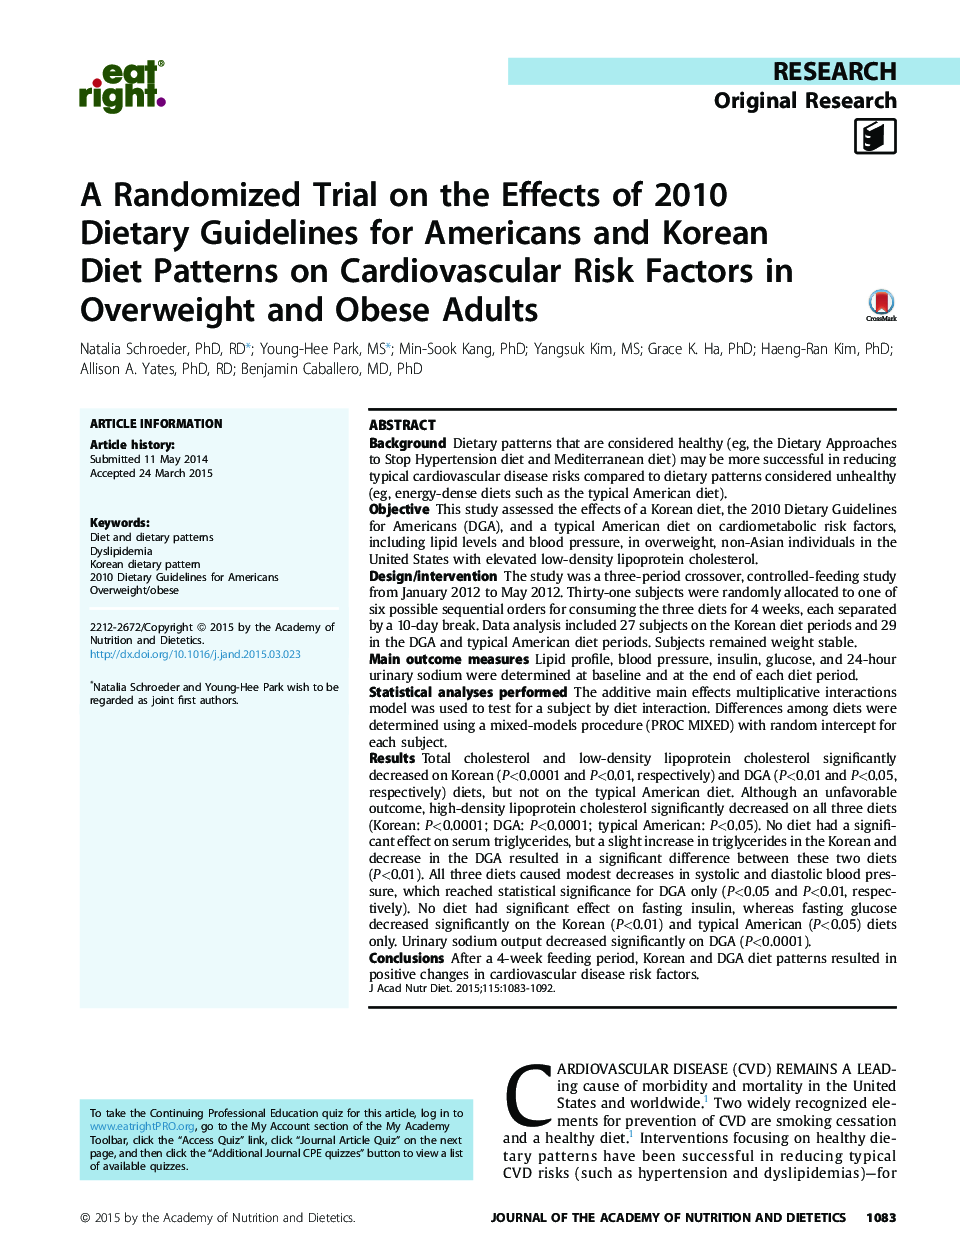 A Randomized Trial on the Effects of 2010 Dietary Guidelines for Americans and Korean Diet Patterns on Cardiovascular Risk Factors in Overweight and Obese Adults 